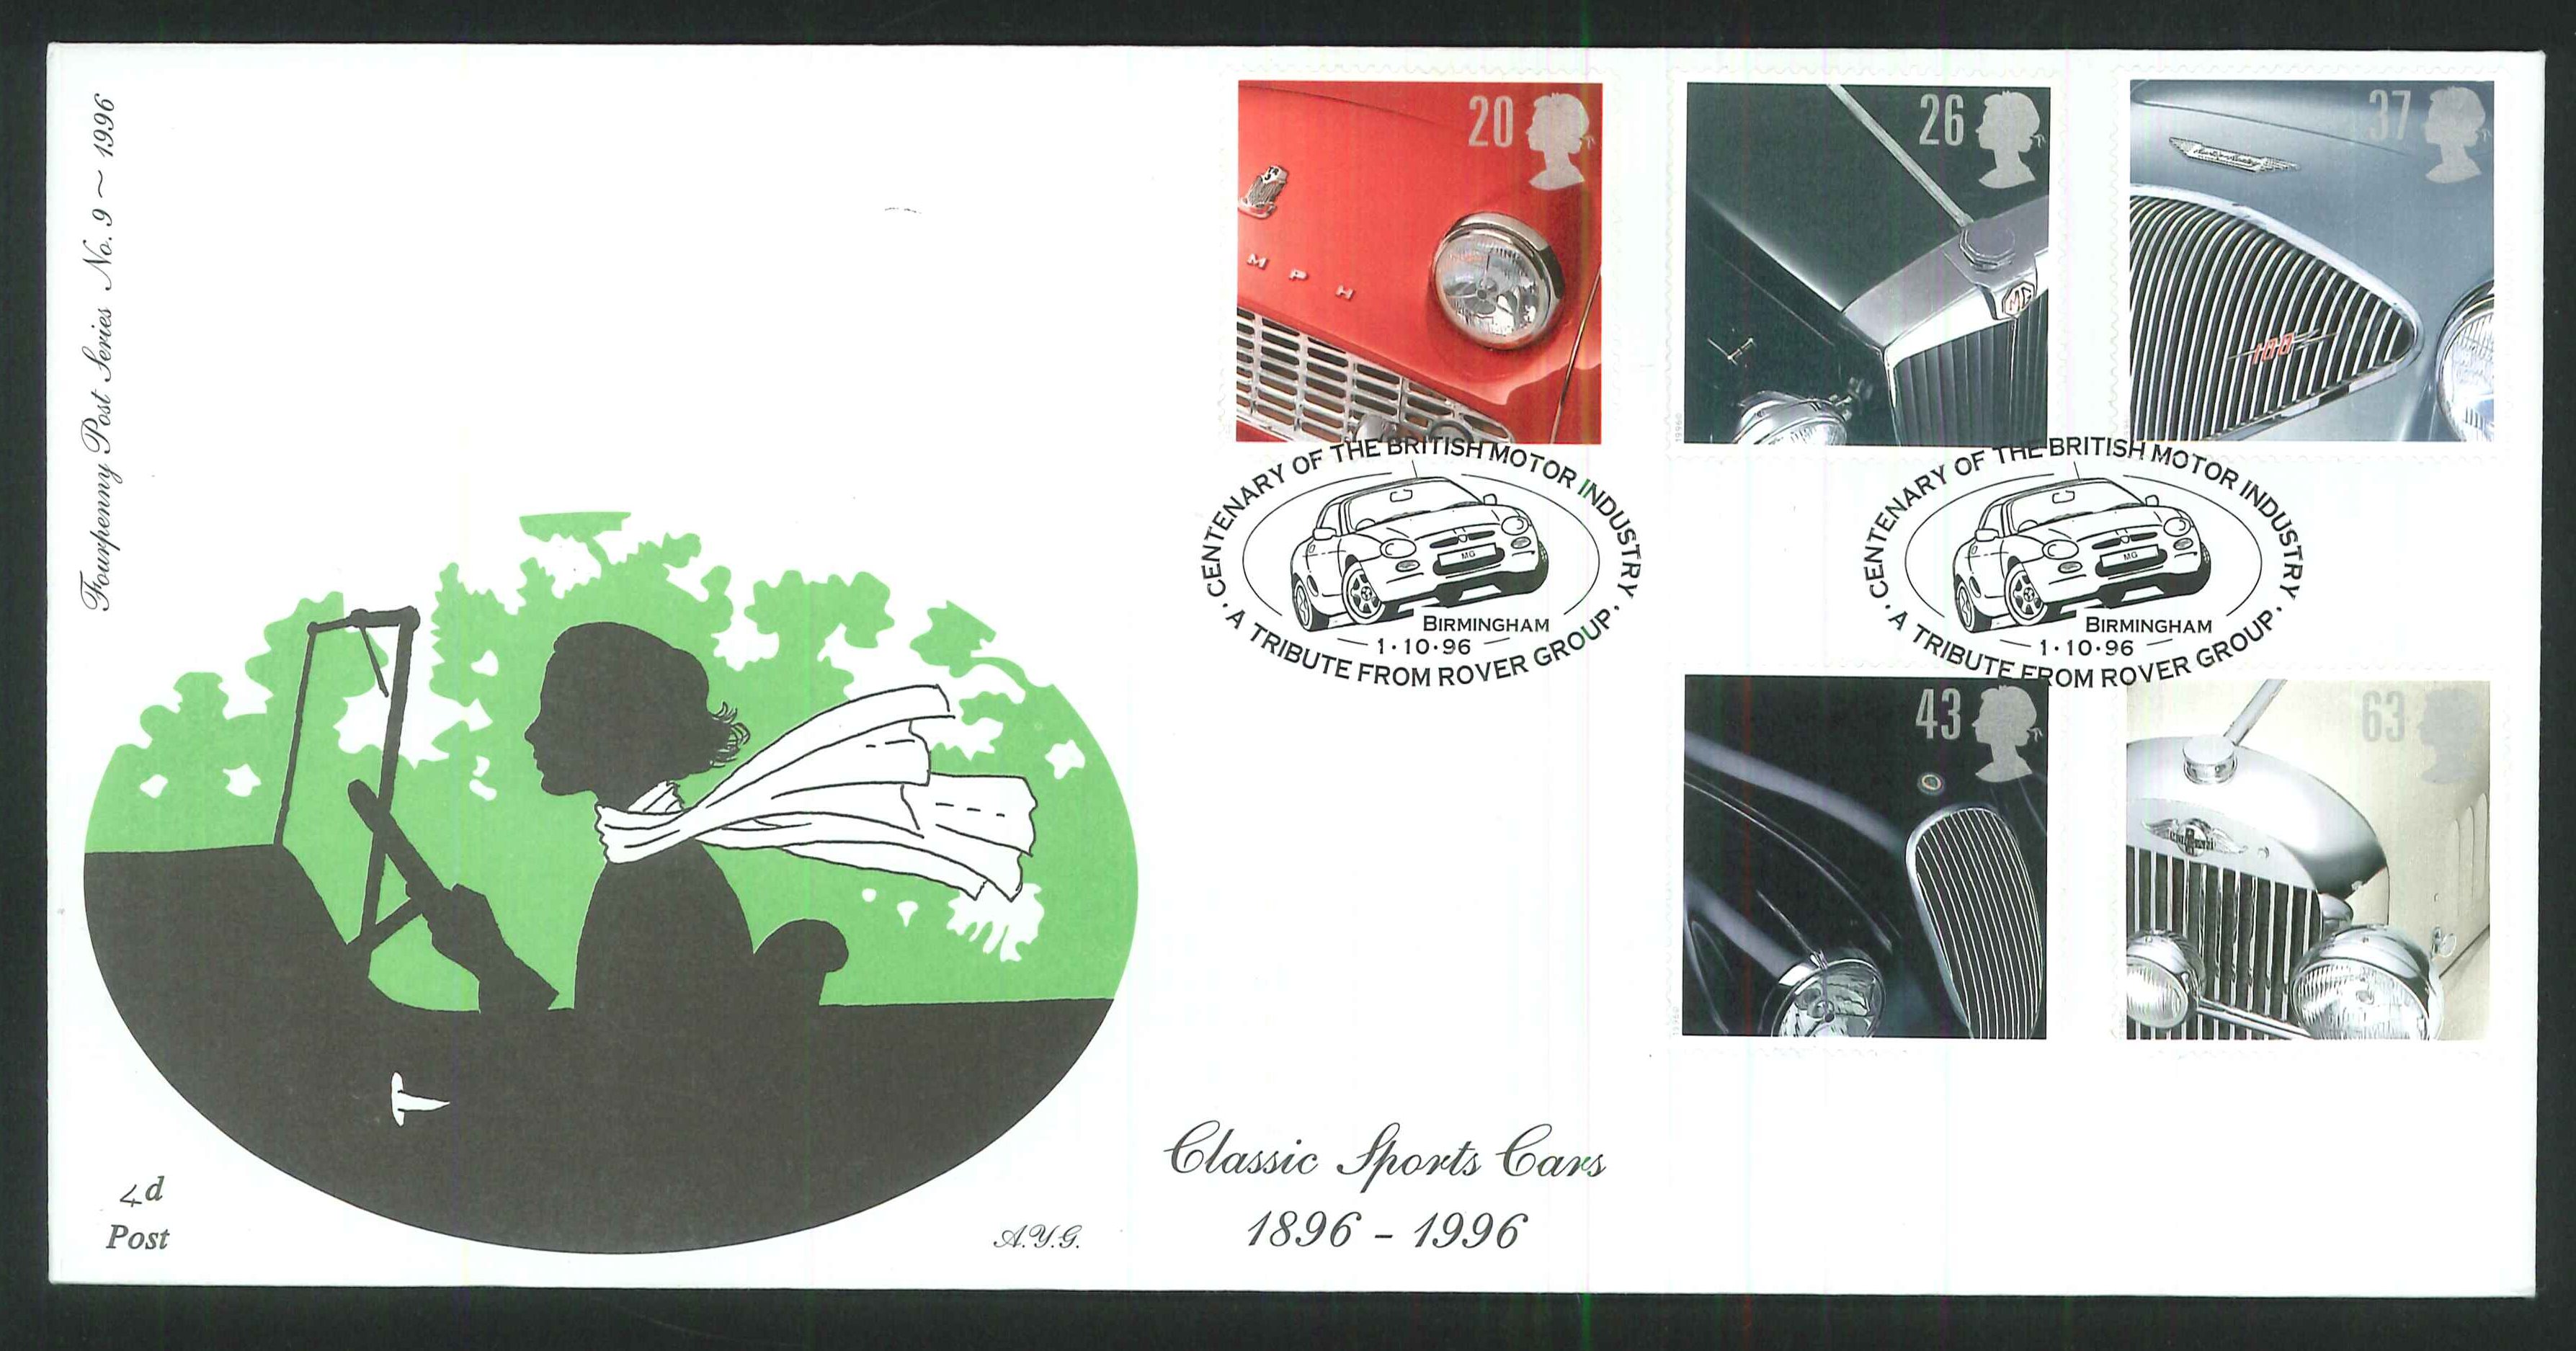 1996 - Classic Sports Cars 1896 - 1996, First Day Cover - Birmingham Postmark - Click Image to Close